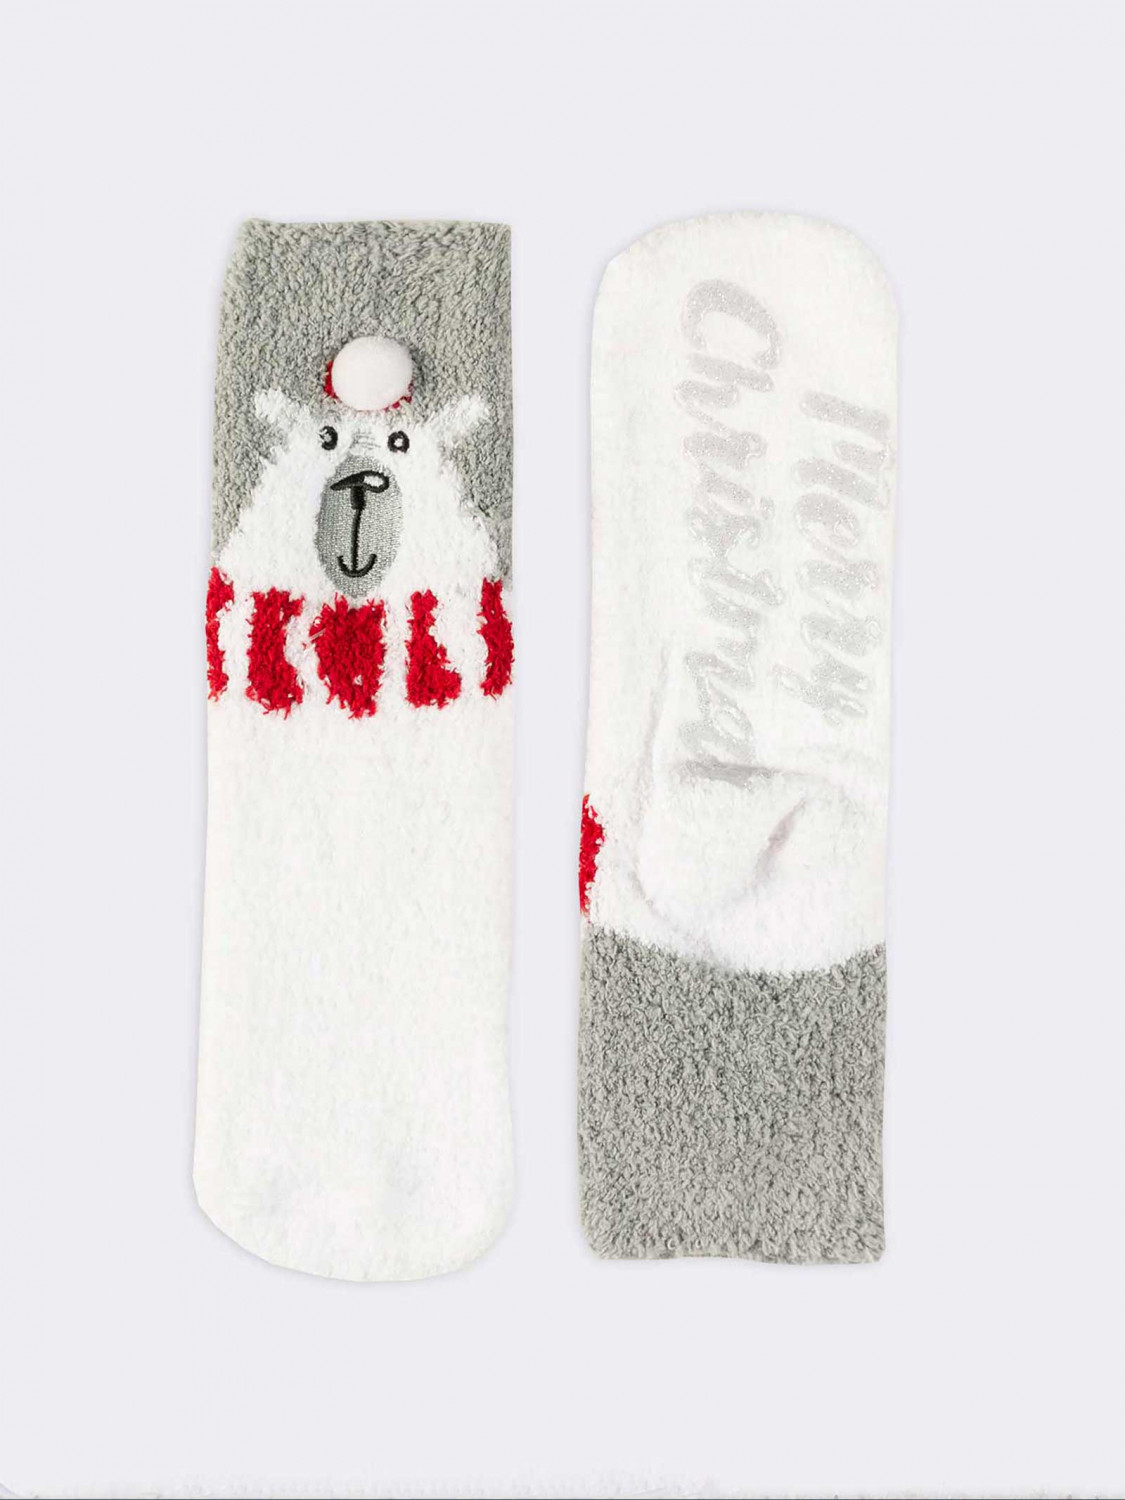 Pair of Christmas socks with snowflakes and Polar Bear patterns